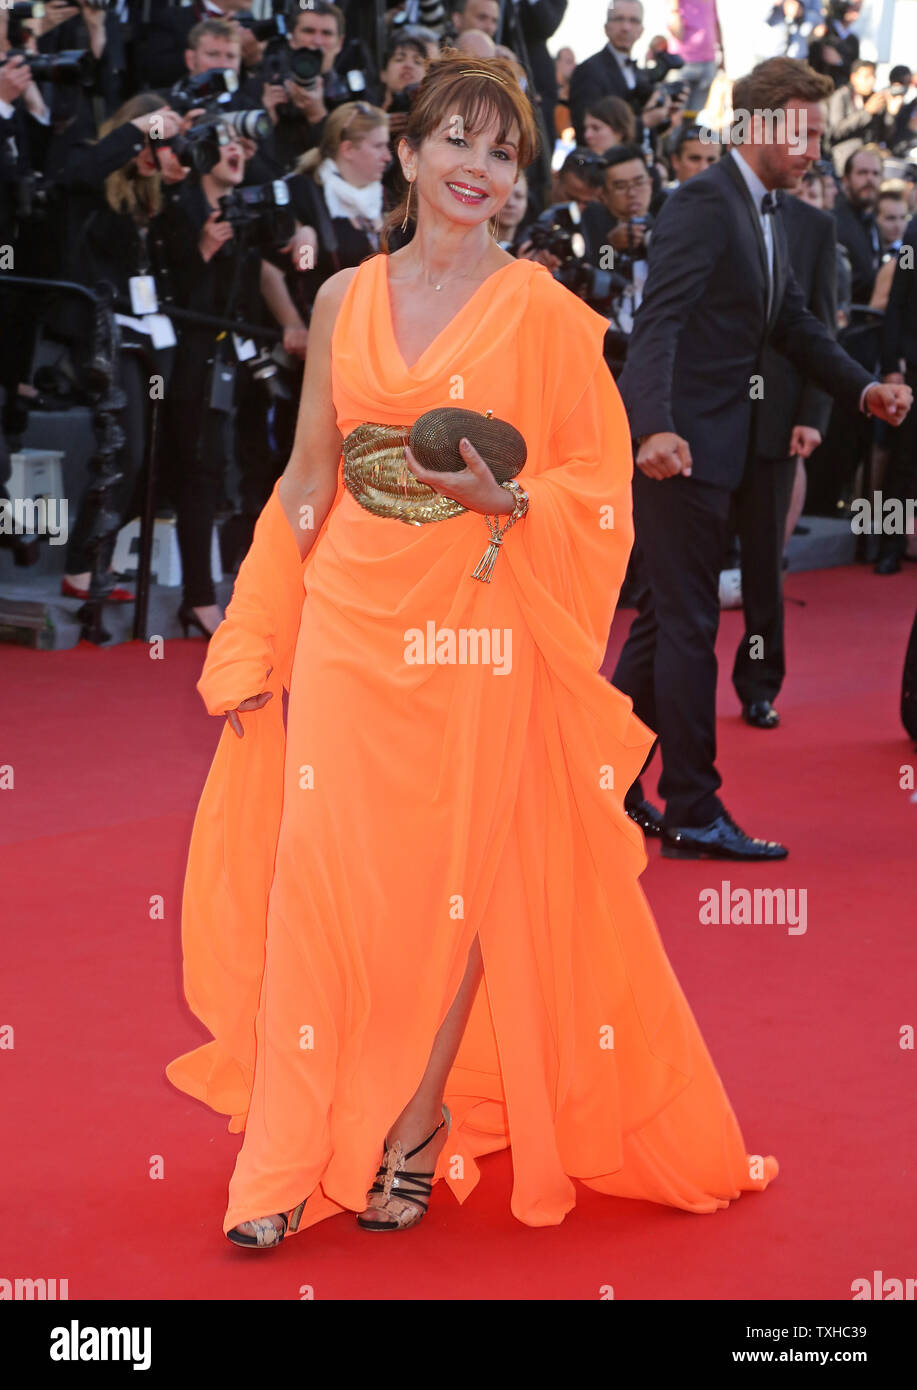 Victoria Abril arrives on the red carpet before the screening of the film 'The Immigrant' during the 66th annual Cannes International Film Festival in Cannes, France on May 24, 2013.  UPI/David Silpa Stock Photo